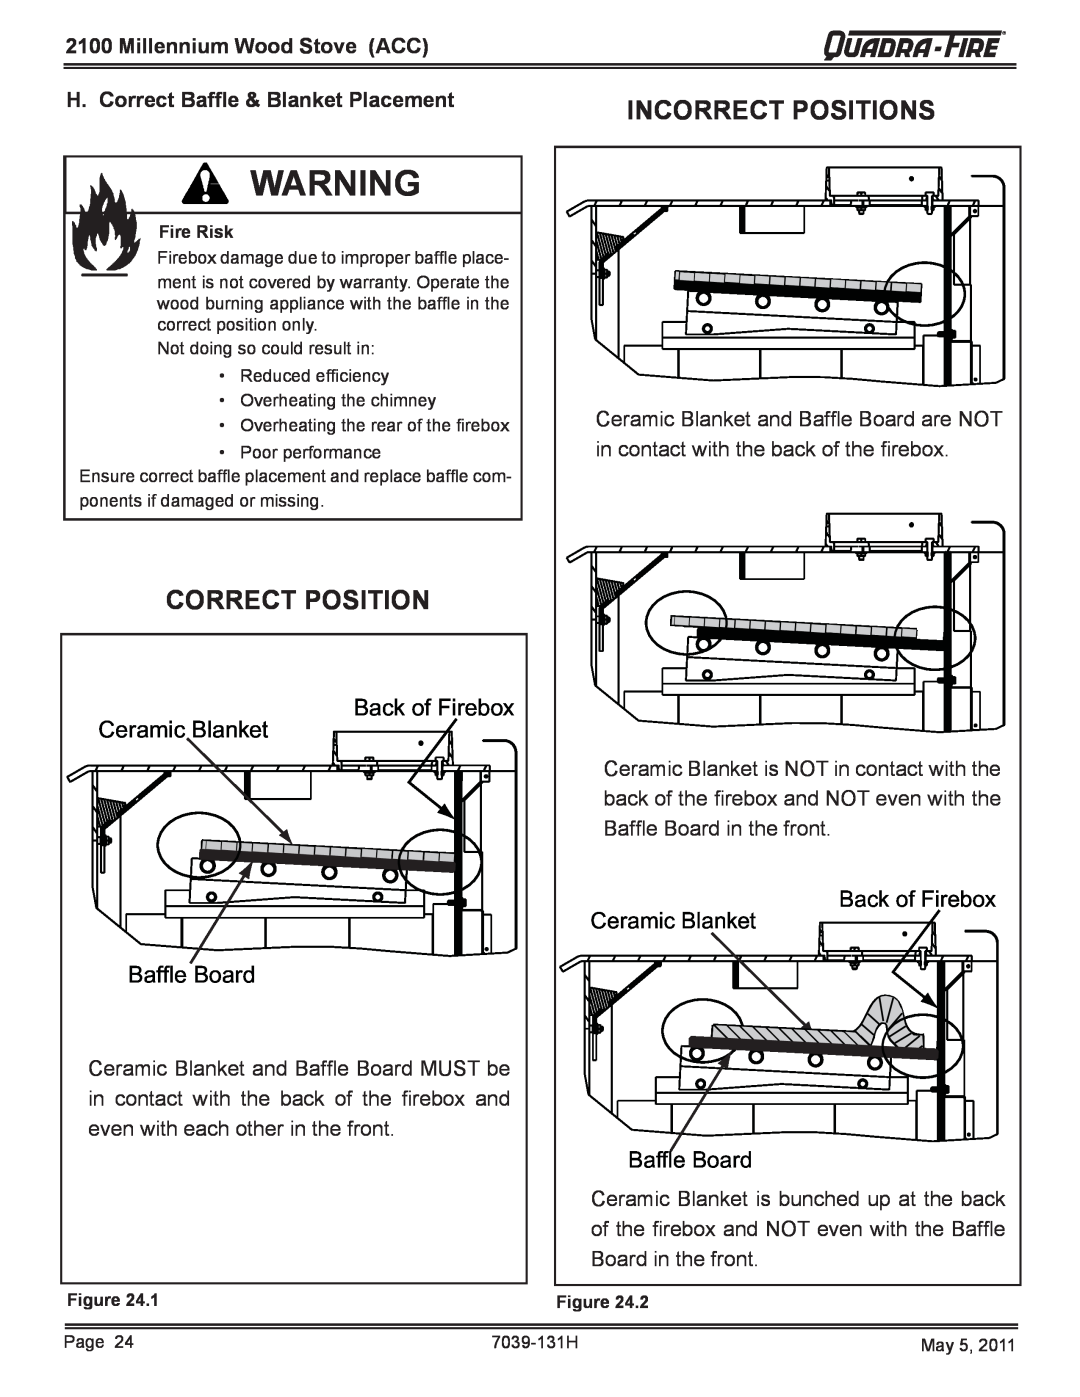 Quadra-Fire 21M-ACC owner manual Incorrect Positions, Correct Position, Ceramic Blanket, Back of Firebox, Baffle Board 